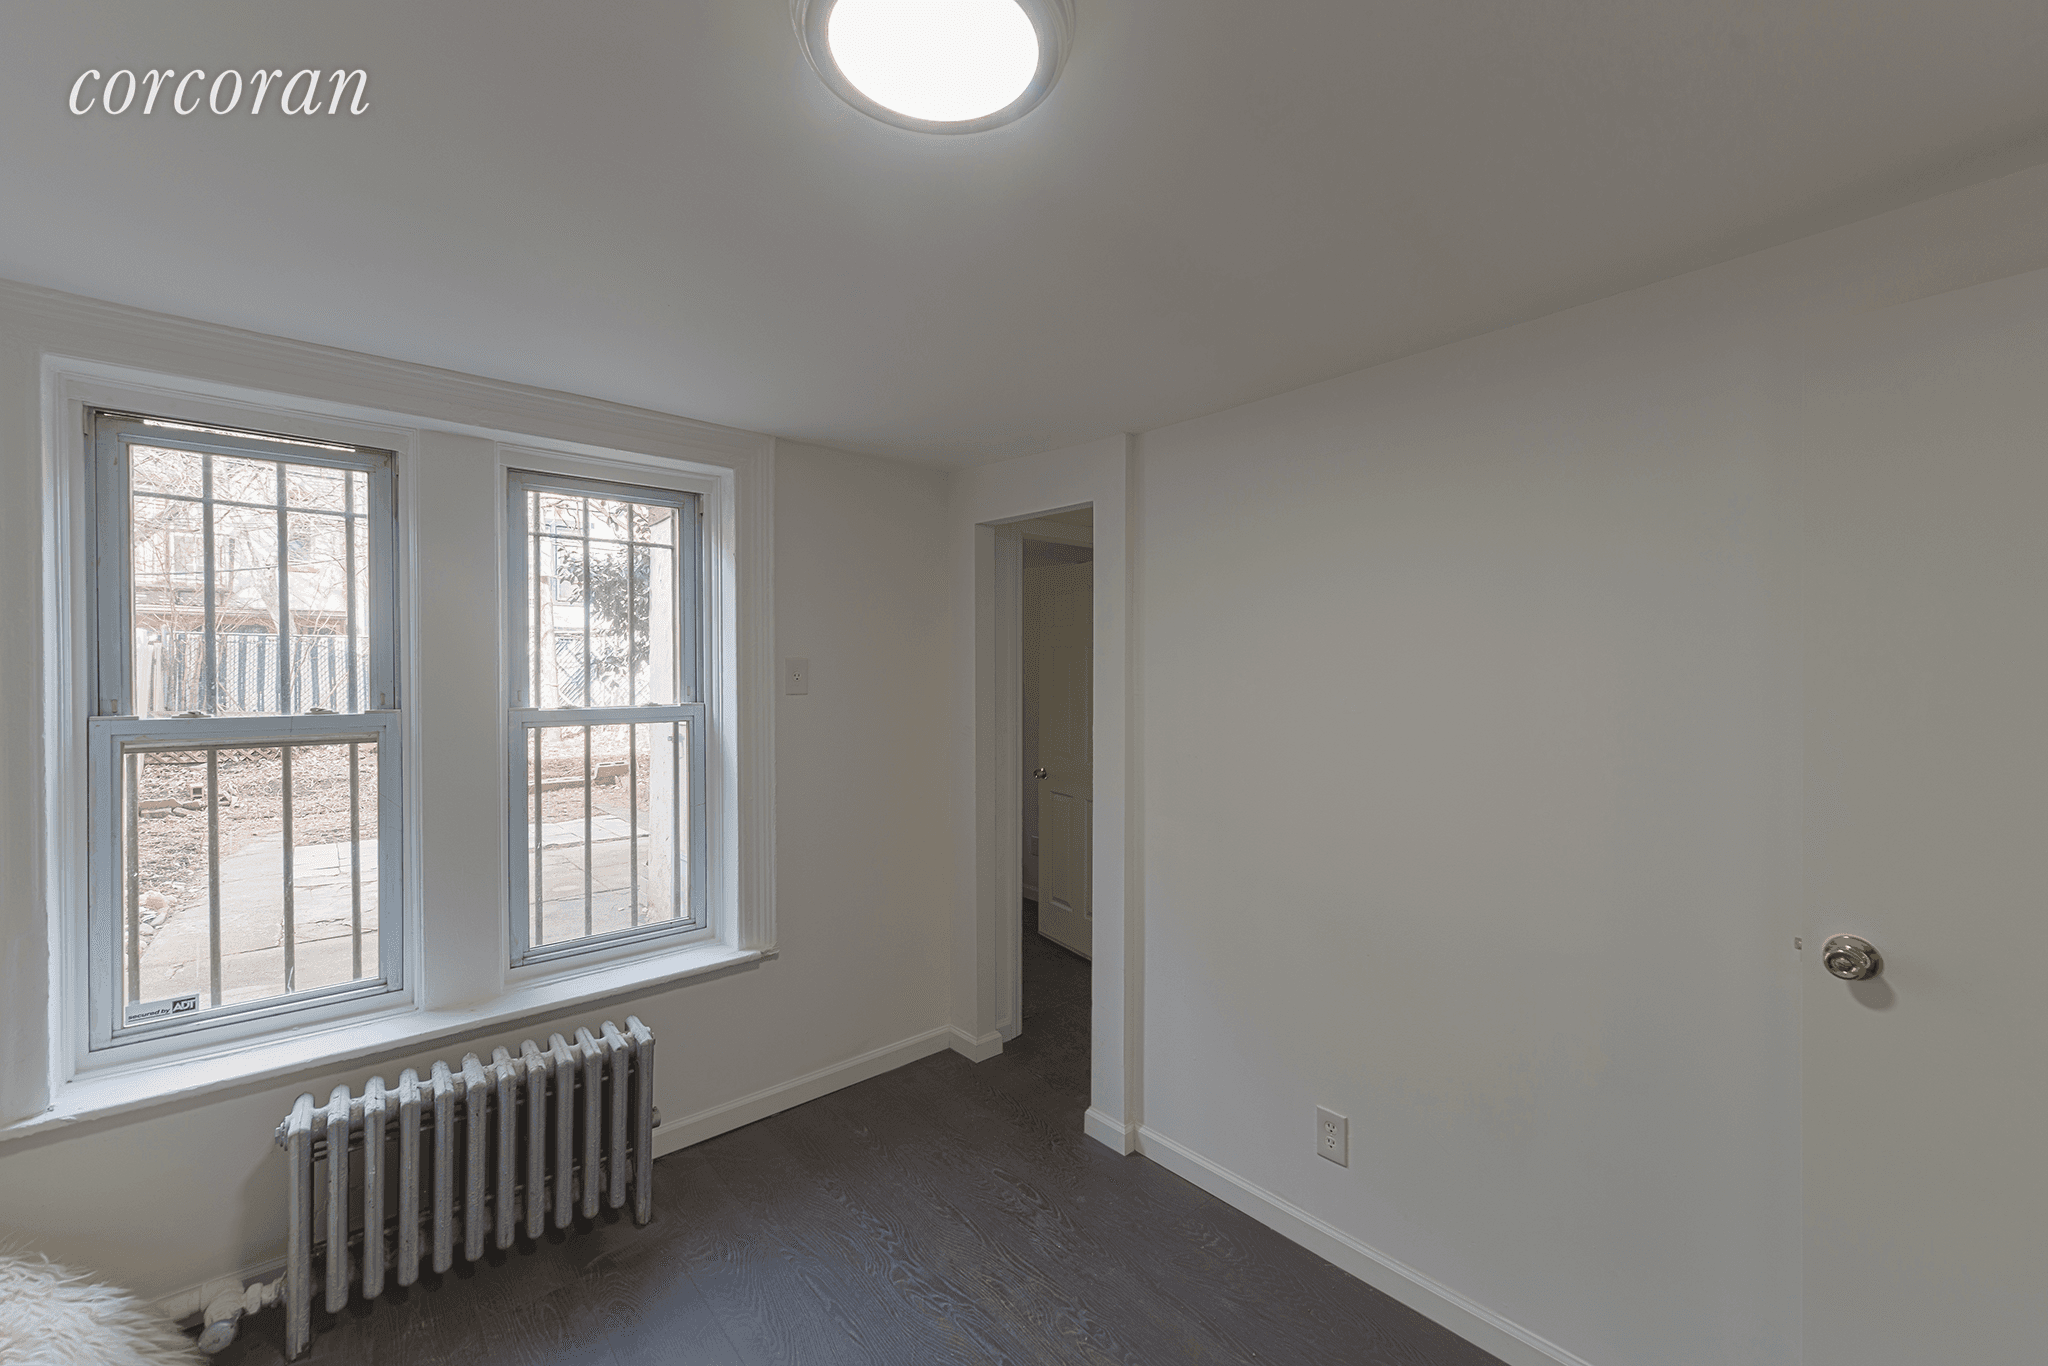 1 bedroom floor through at 231 Decatur Street, in the heart of the Stuyvesant Heights historic district, just a short stroll to Peaches, Saraghina Bakery, and Skal cafe.